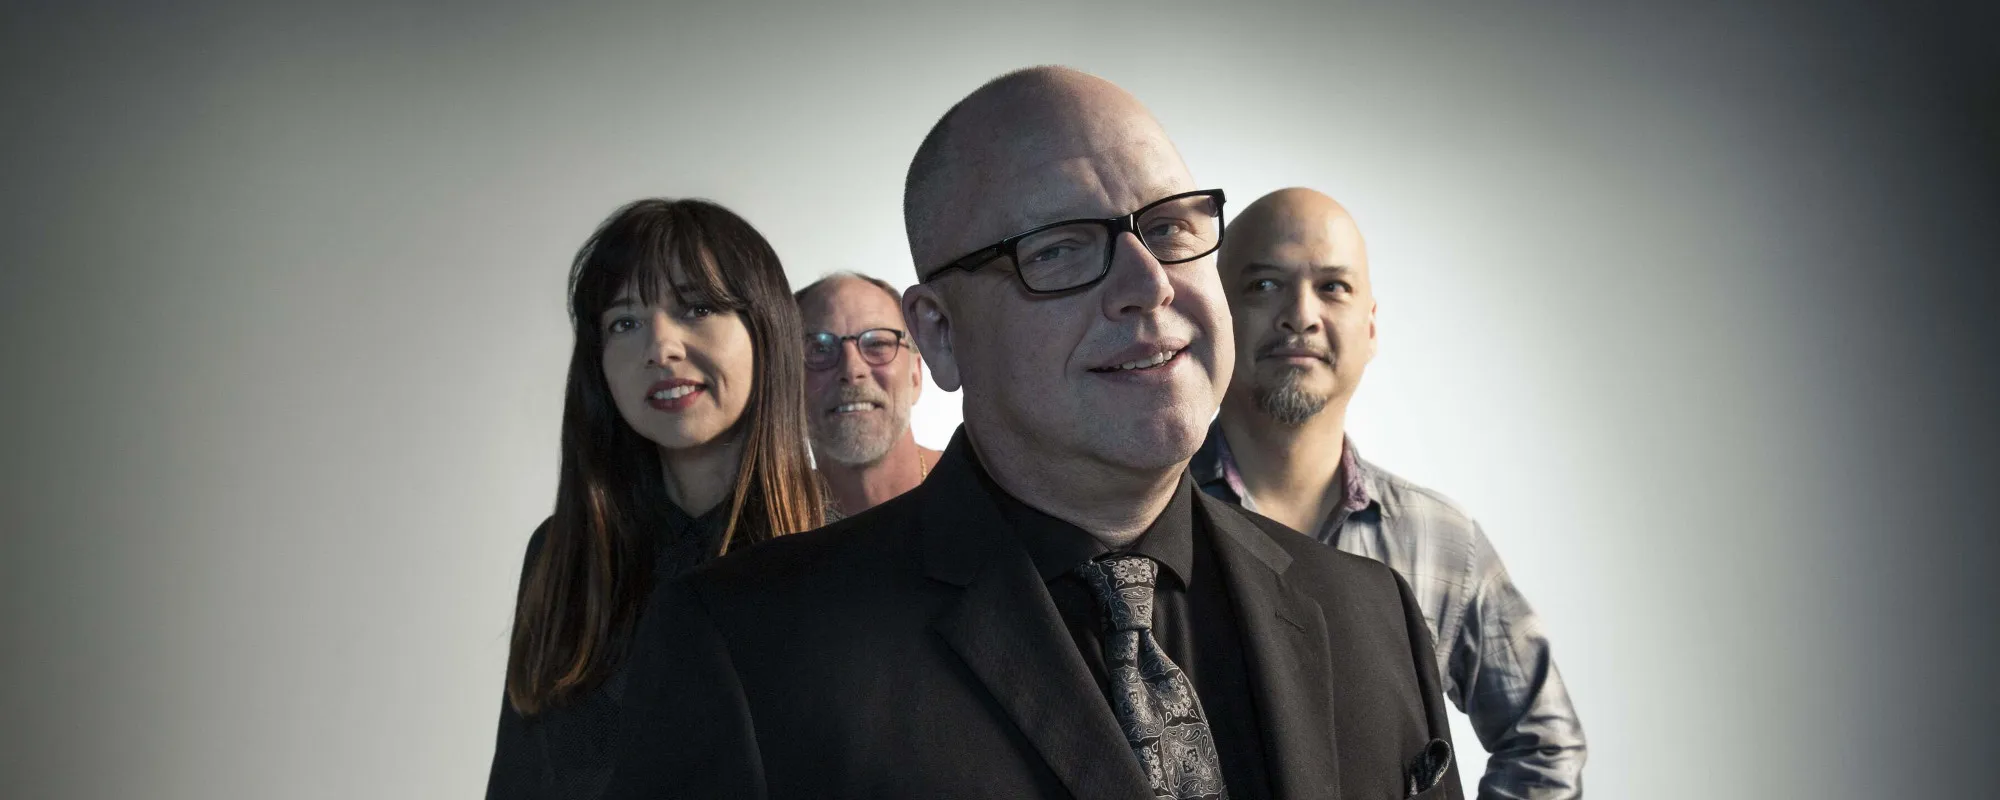 Pixies Electrify with Roaring New Anthem, “Dregs of the Wine”